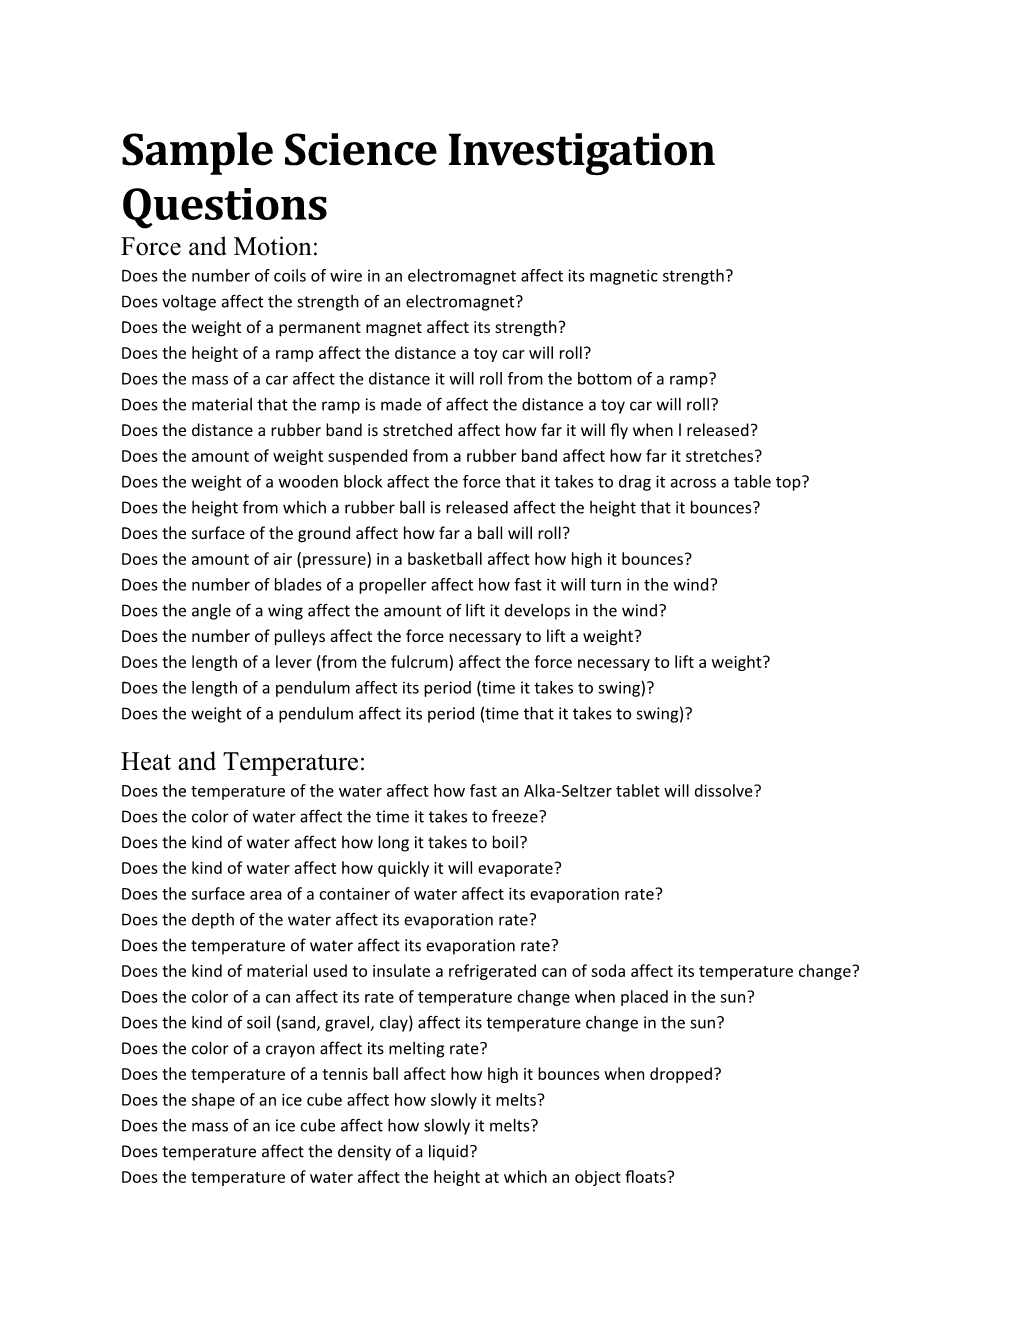 Sample Science Investigation Questions